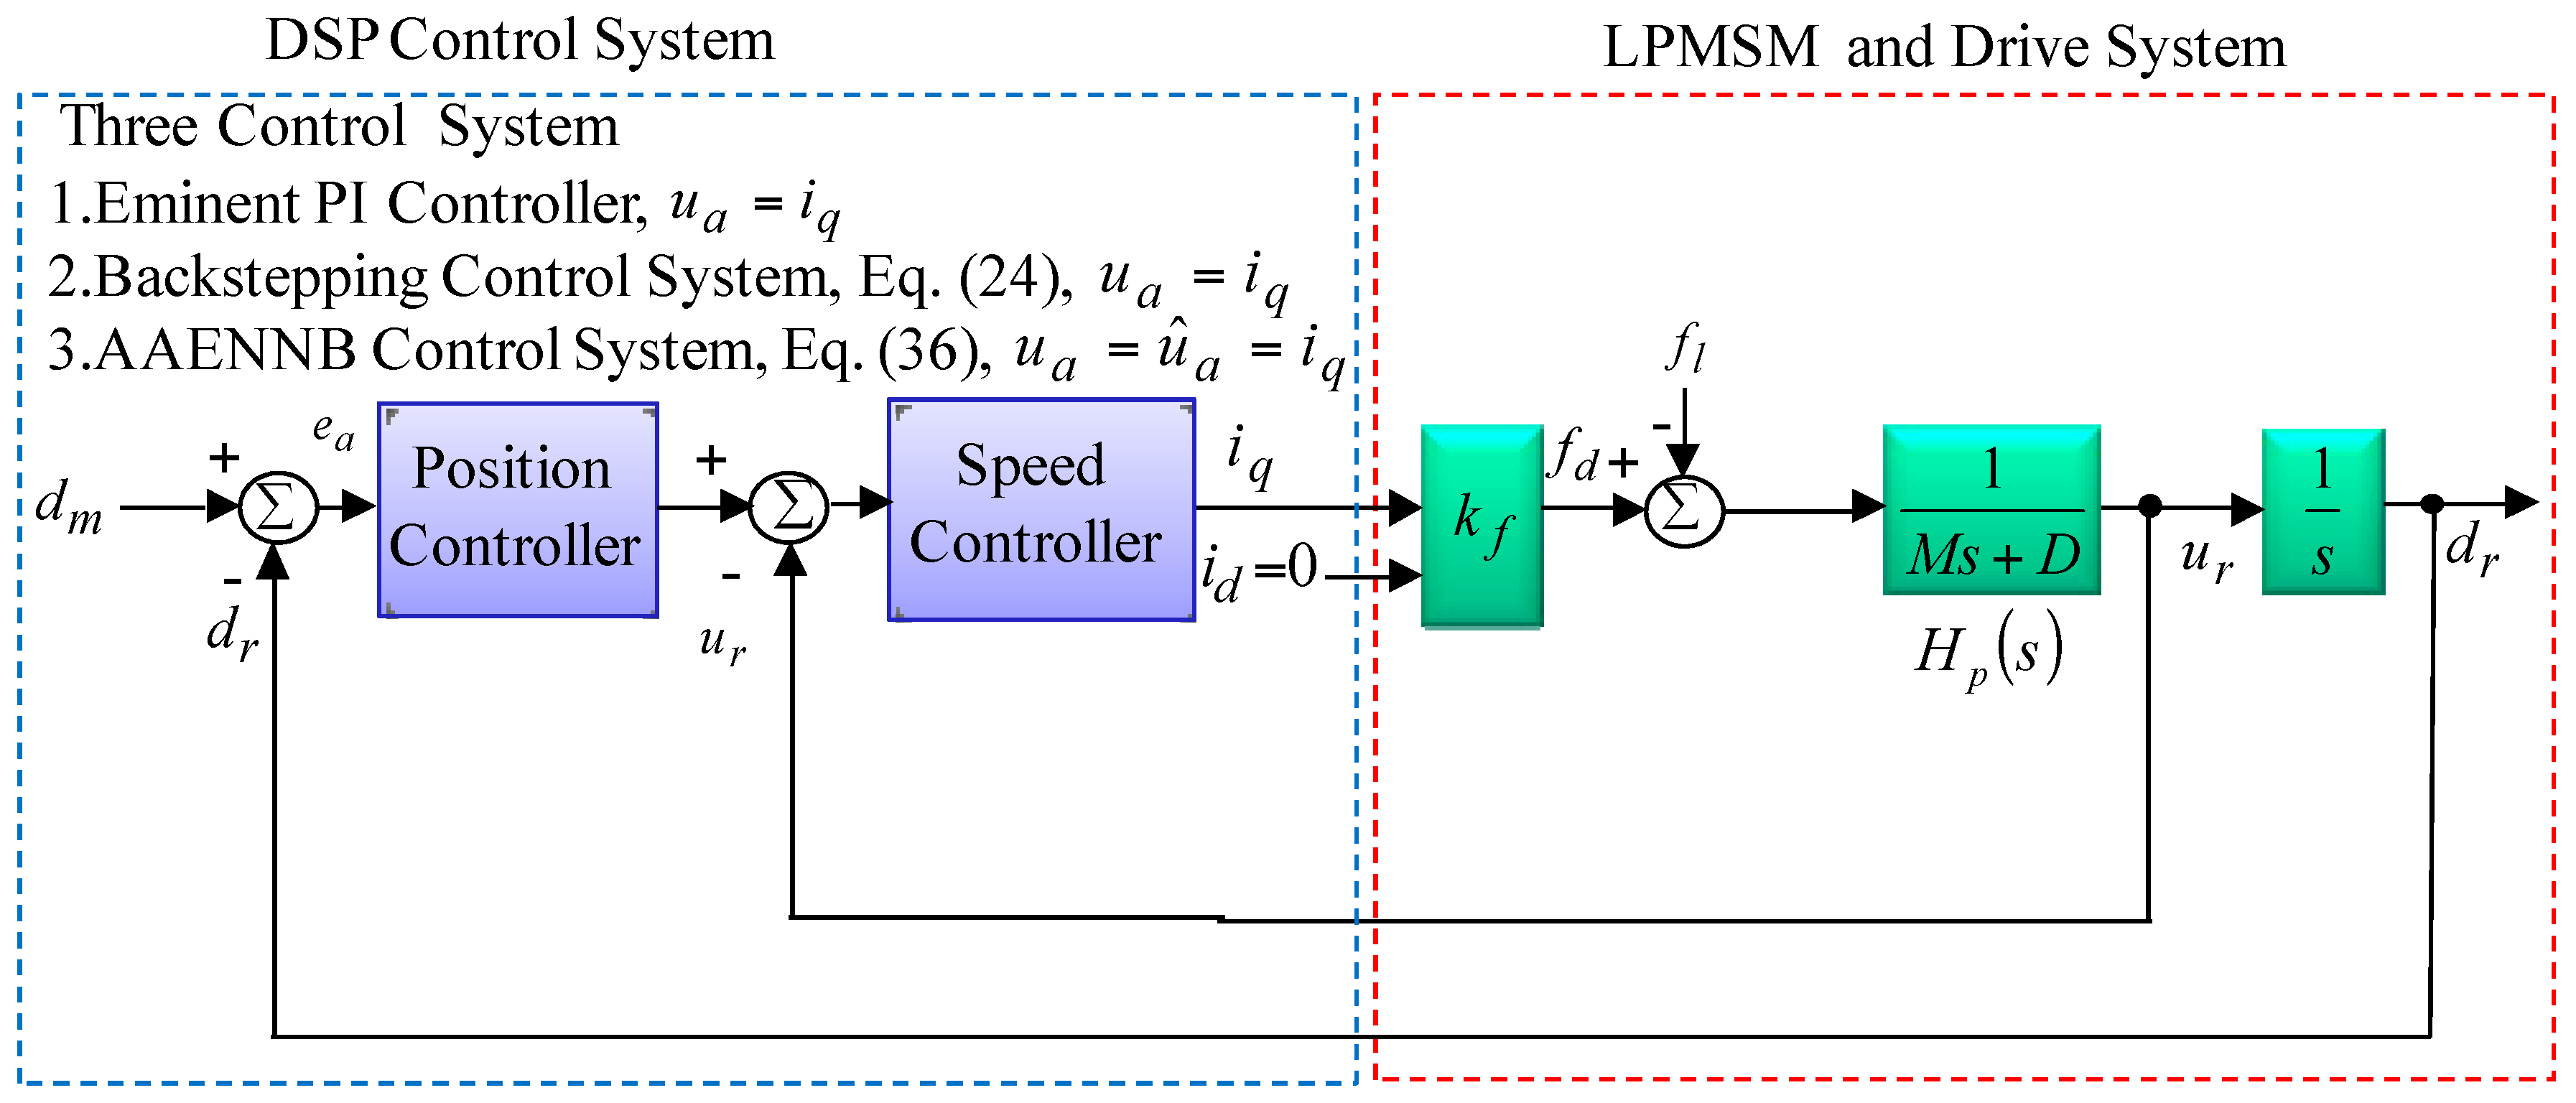 Sensors Free Full Text Precision Motion Control Of A Linear Permanent Magnet Synchronous Machine Based On Linear Optical Ruler Sensor And Hall Sensor Html